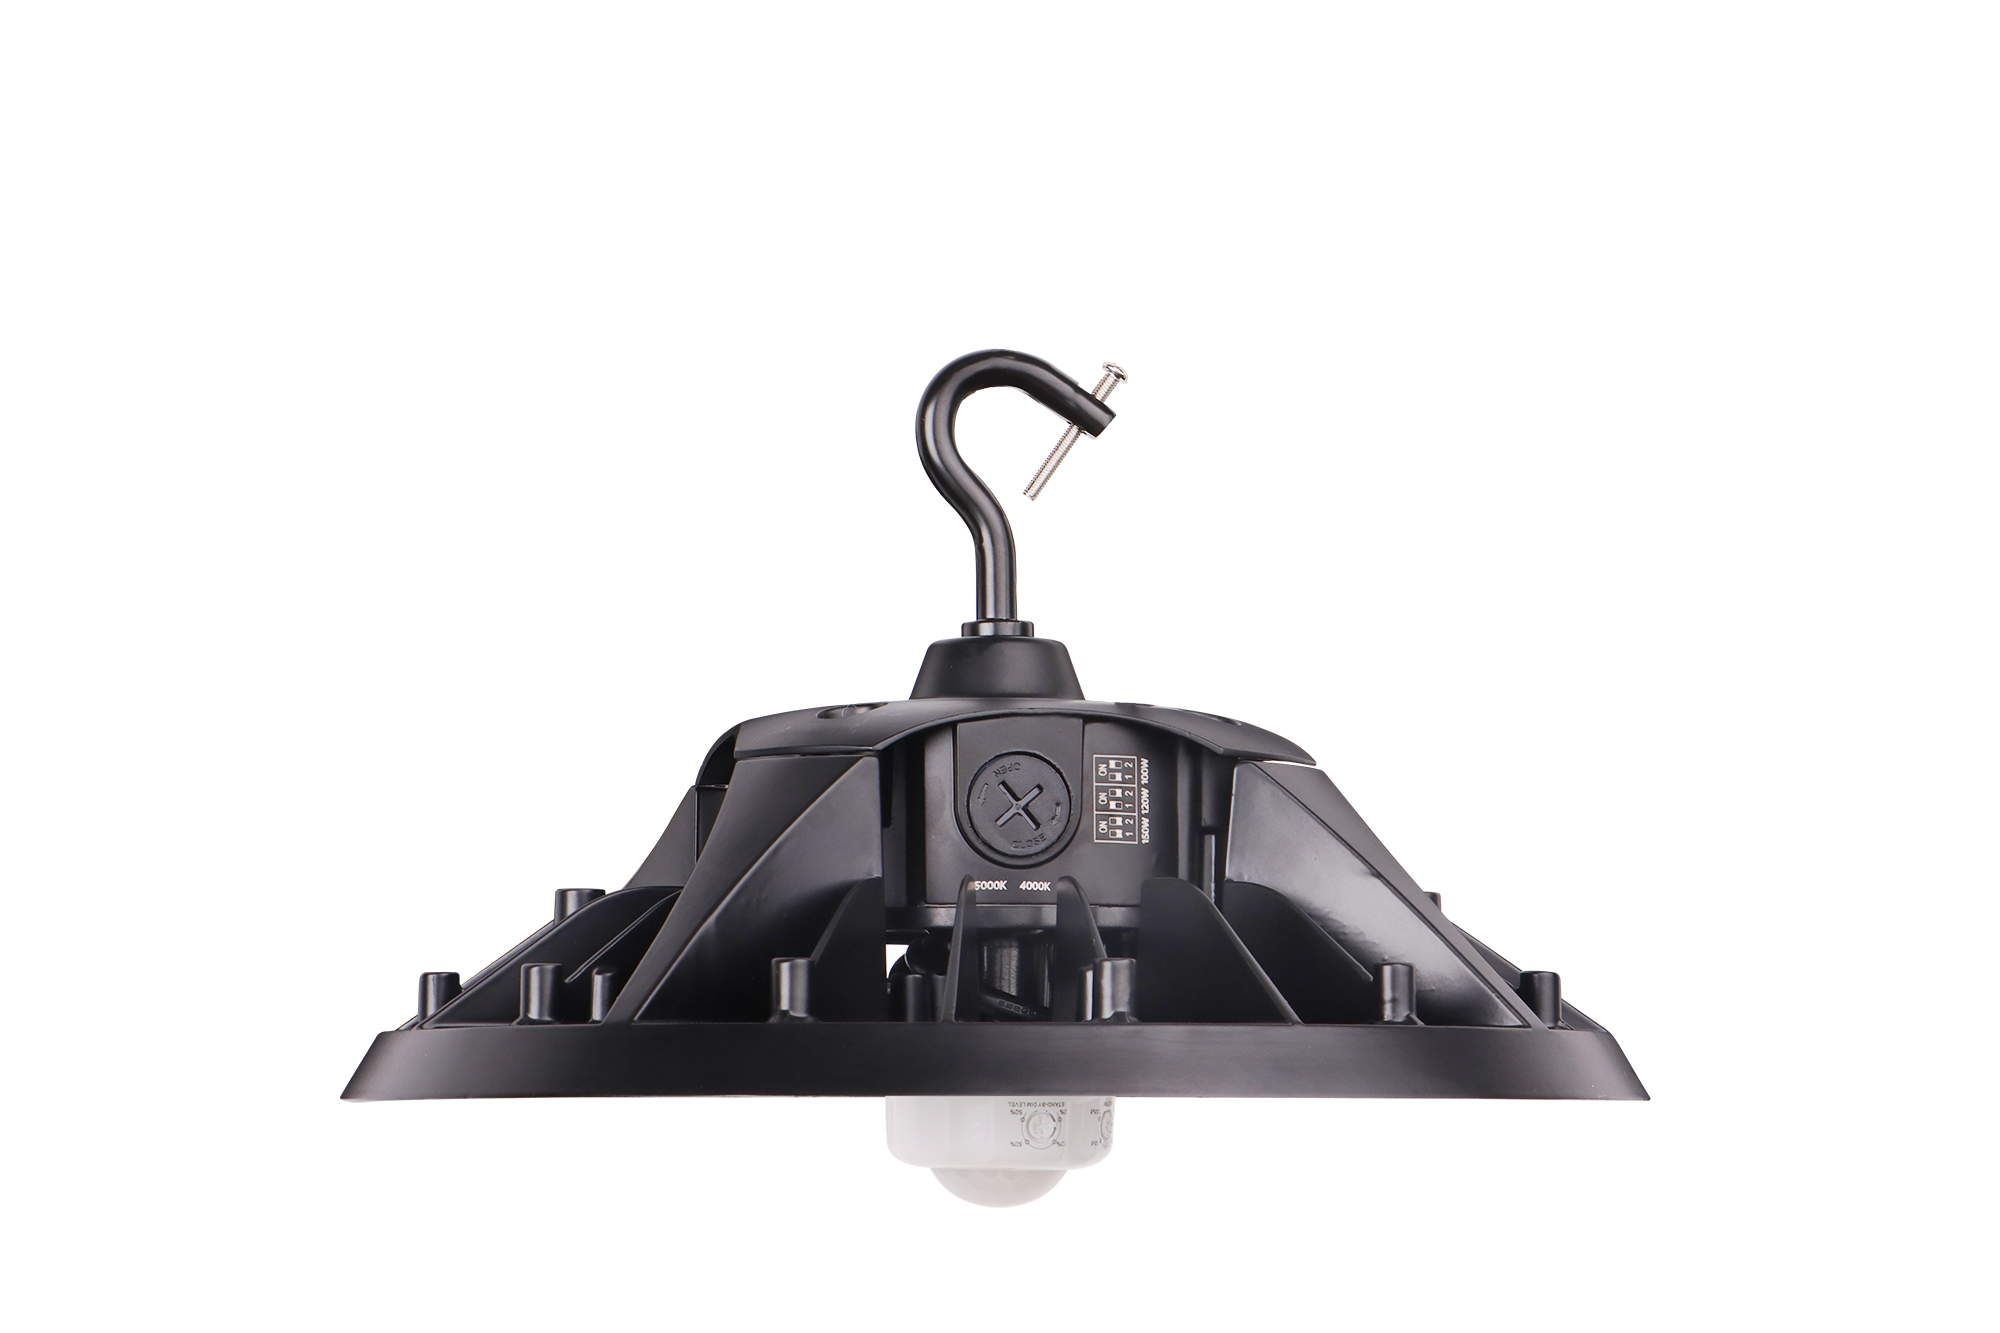 150W Tunable UFO LED High Bay Light - Selectable Wattage (150W /120W/100W) & CCT (4000K/5000K), 23,100 Lumens, 0-10V Dimmable - UL & DLC 5.1 Certified - Eco LED Lightings 